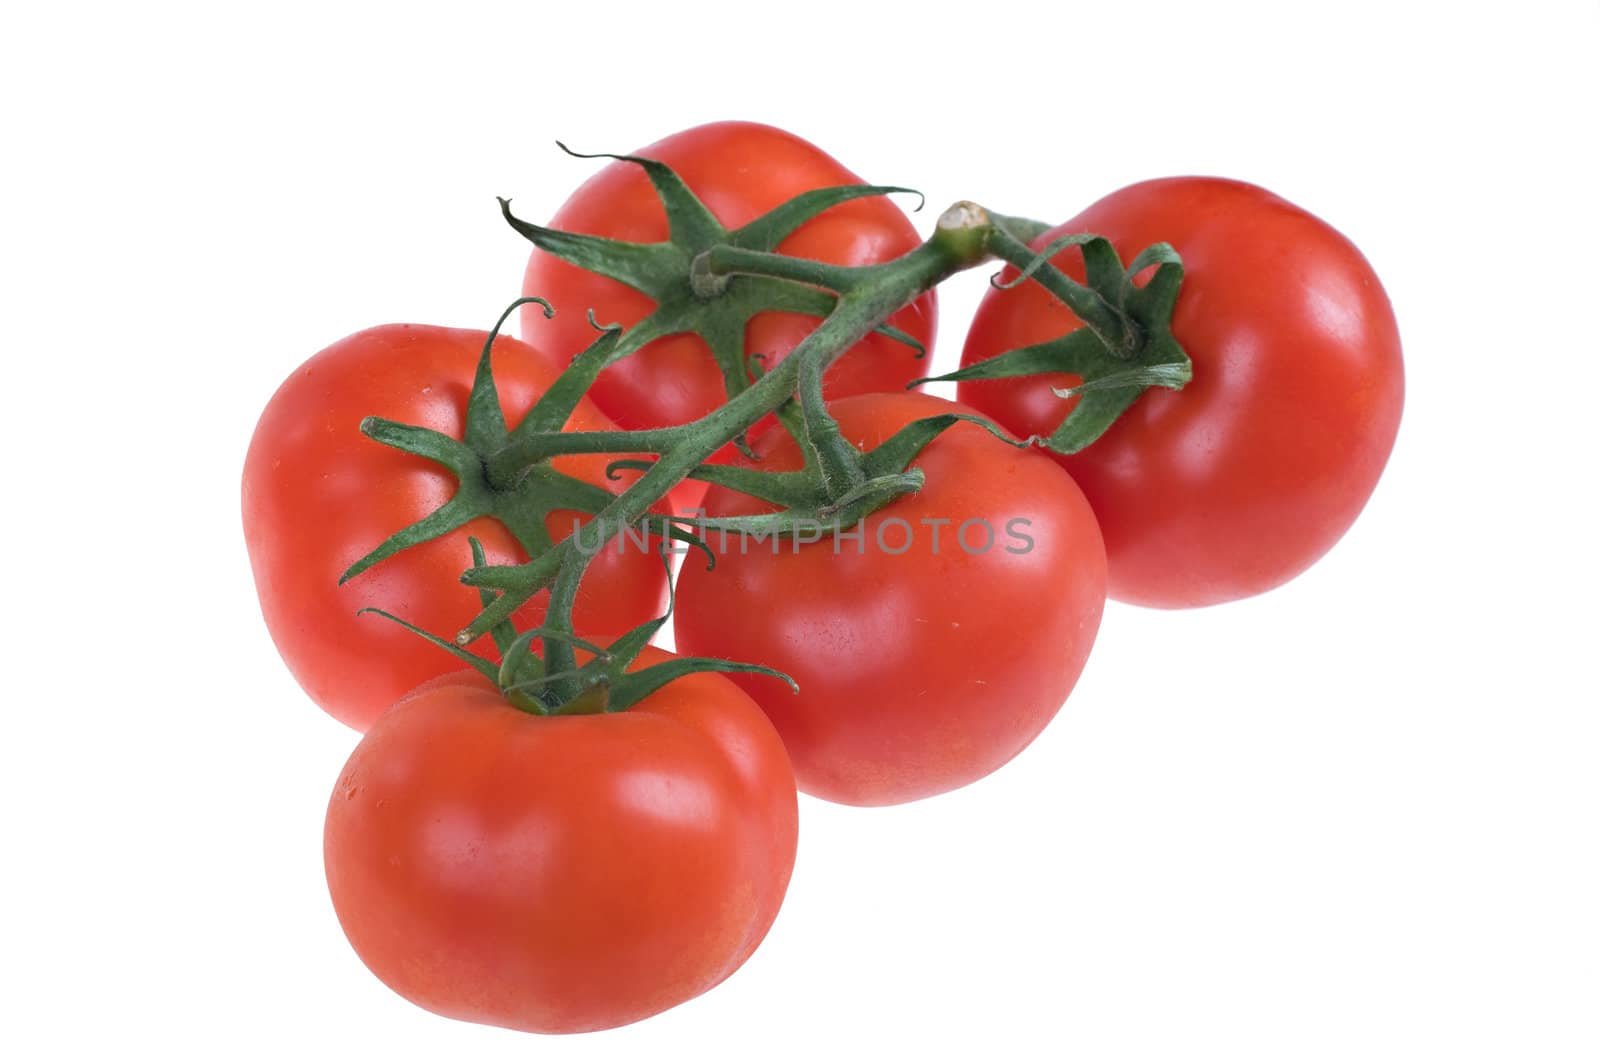 great image of some yummy fresh ripe juicy tomatoes